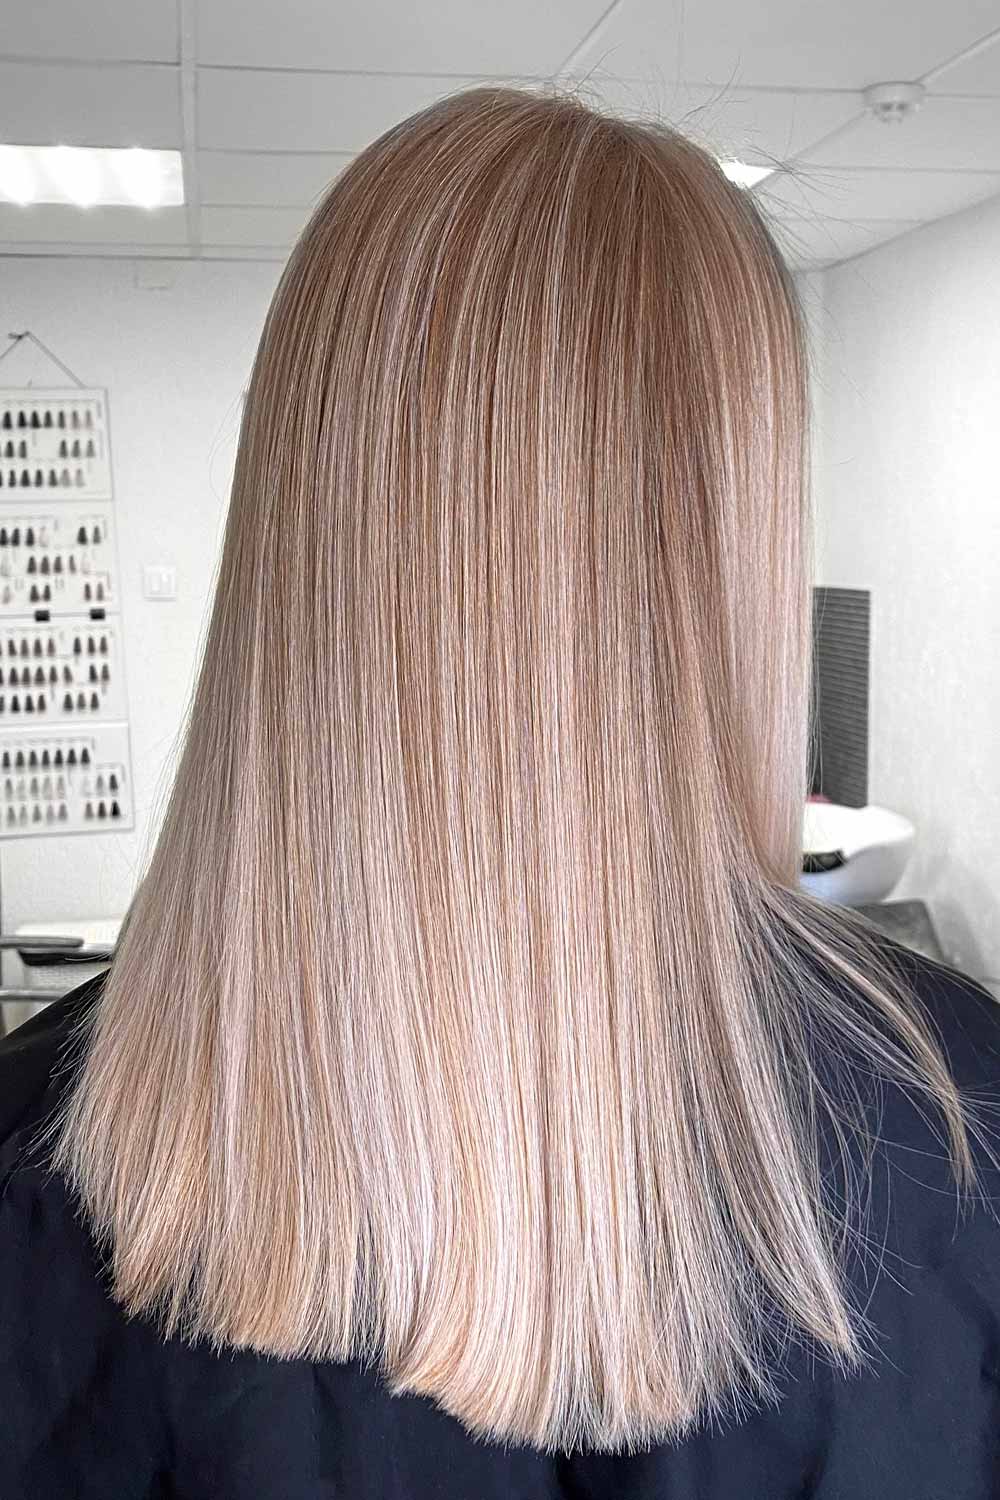 Balayage can be adapted to different hair lengths, textures, and colors